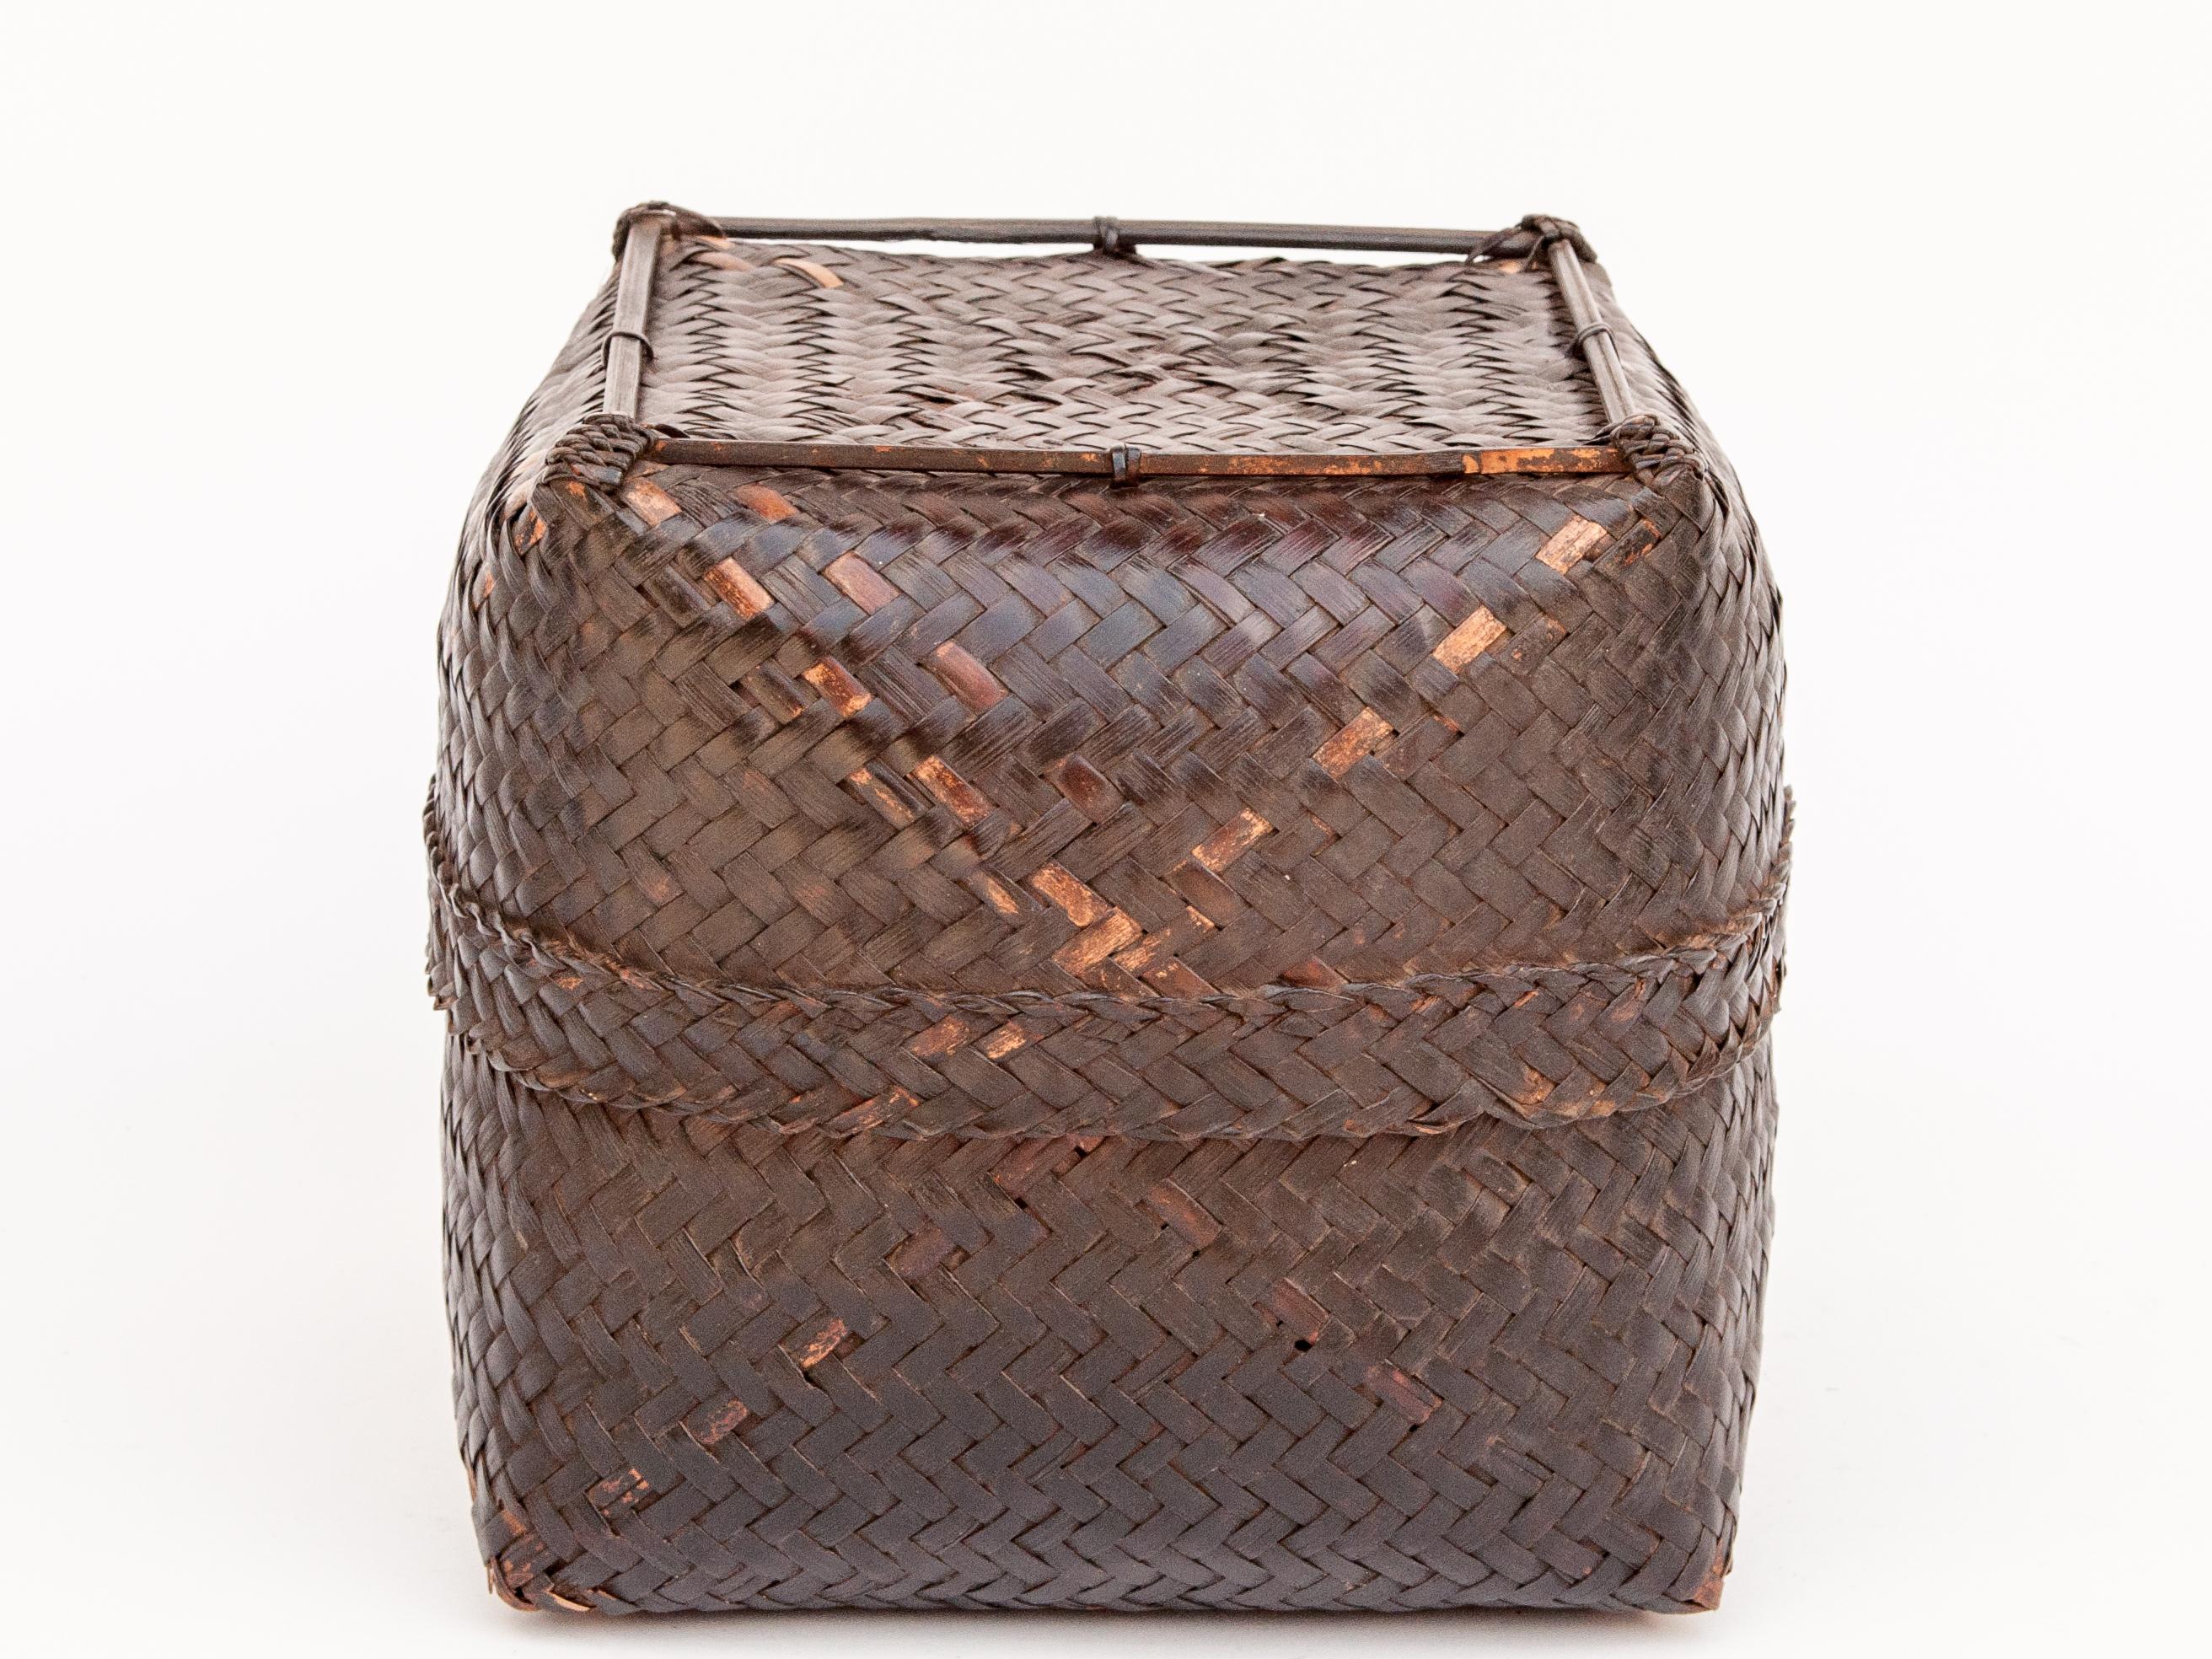 Tribal Vintage Bamboo Storage Basket with Lid Lombok, Indonesia, Mid-Late 20th Century